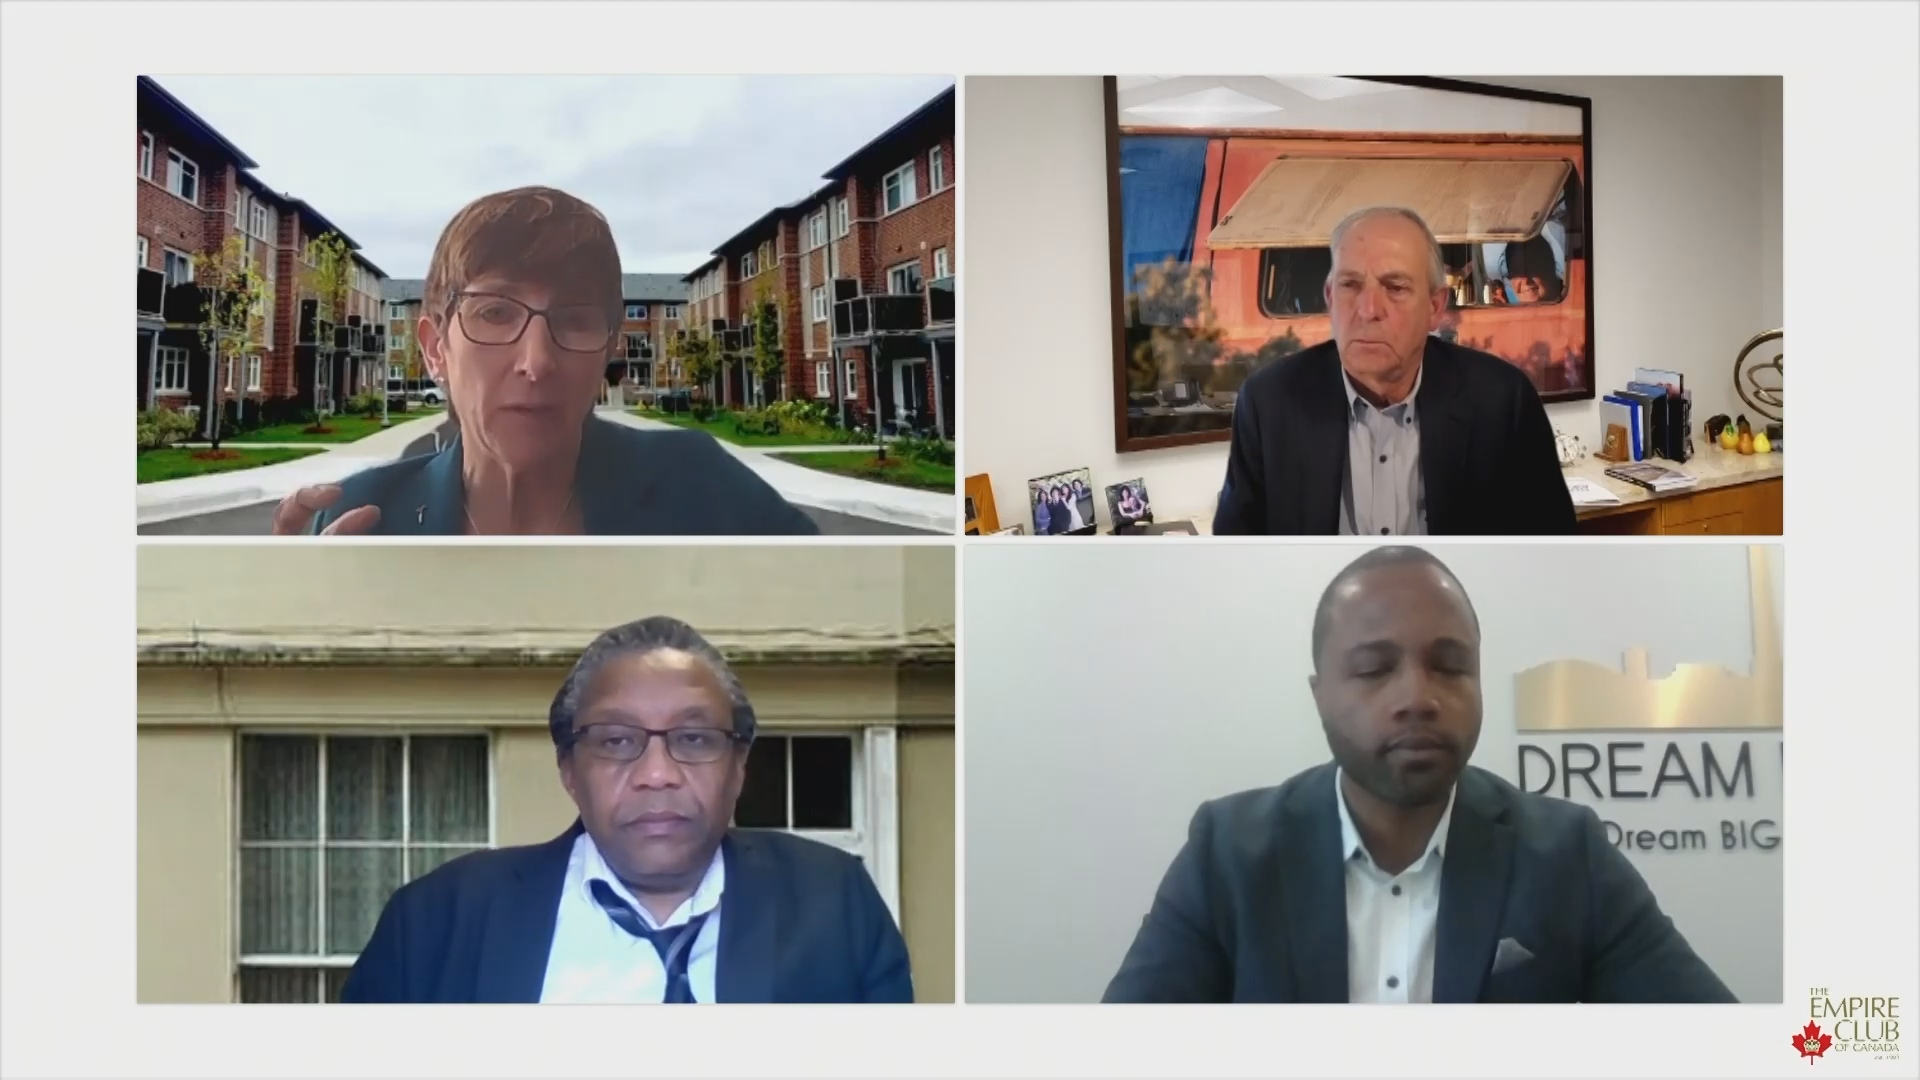 Group of 4 speakers participating in a virtual panel discussion